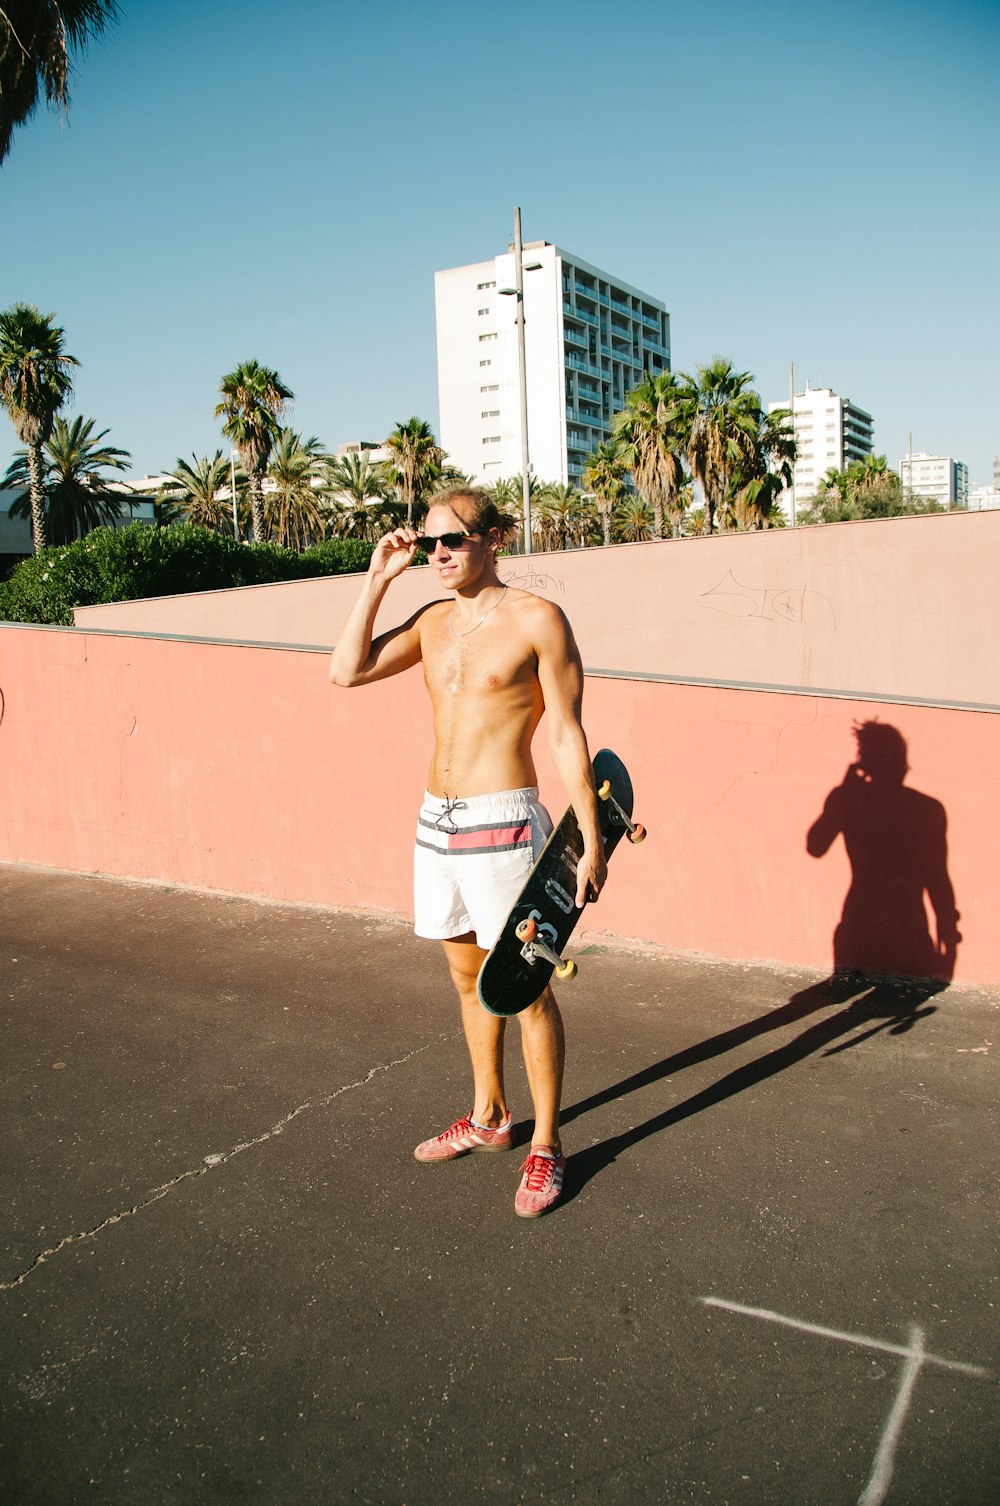 a shirtless man holding a skateboard in a parking lot